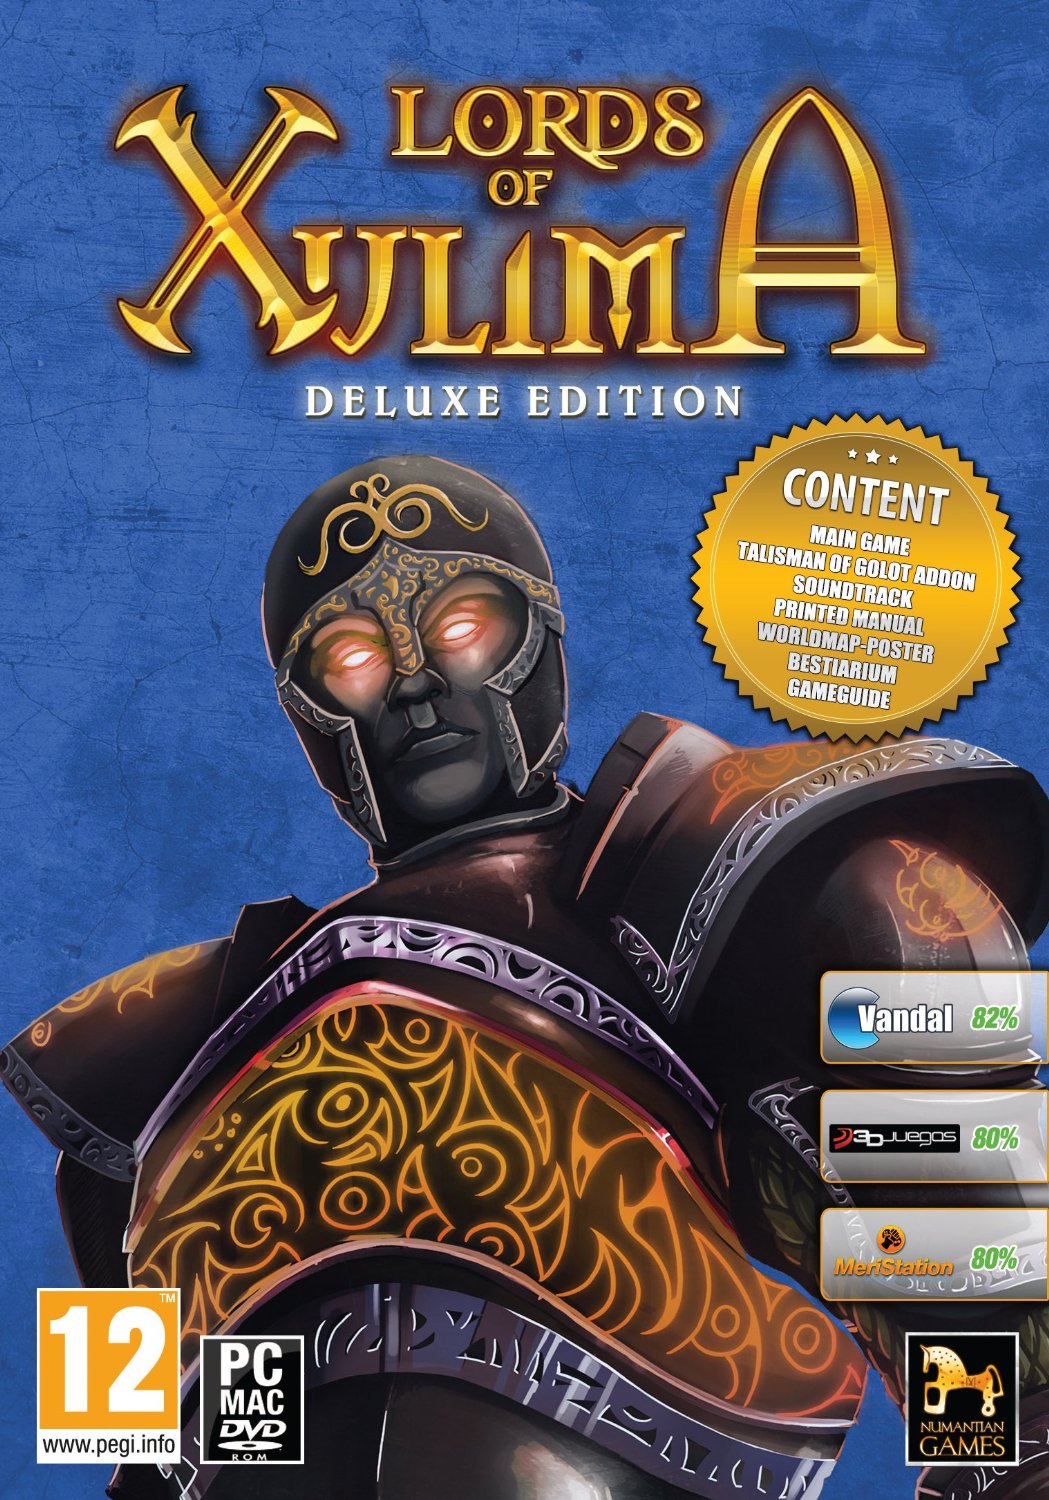 Lords of Xulima Deluxe Edition (PC), Numantian Games